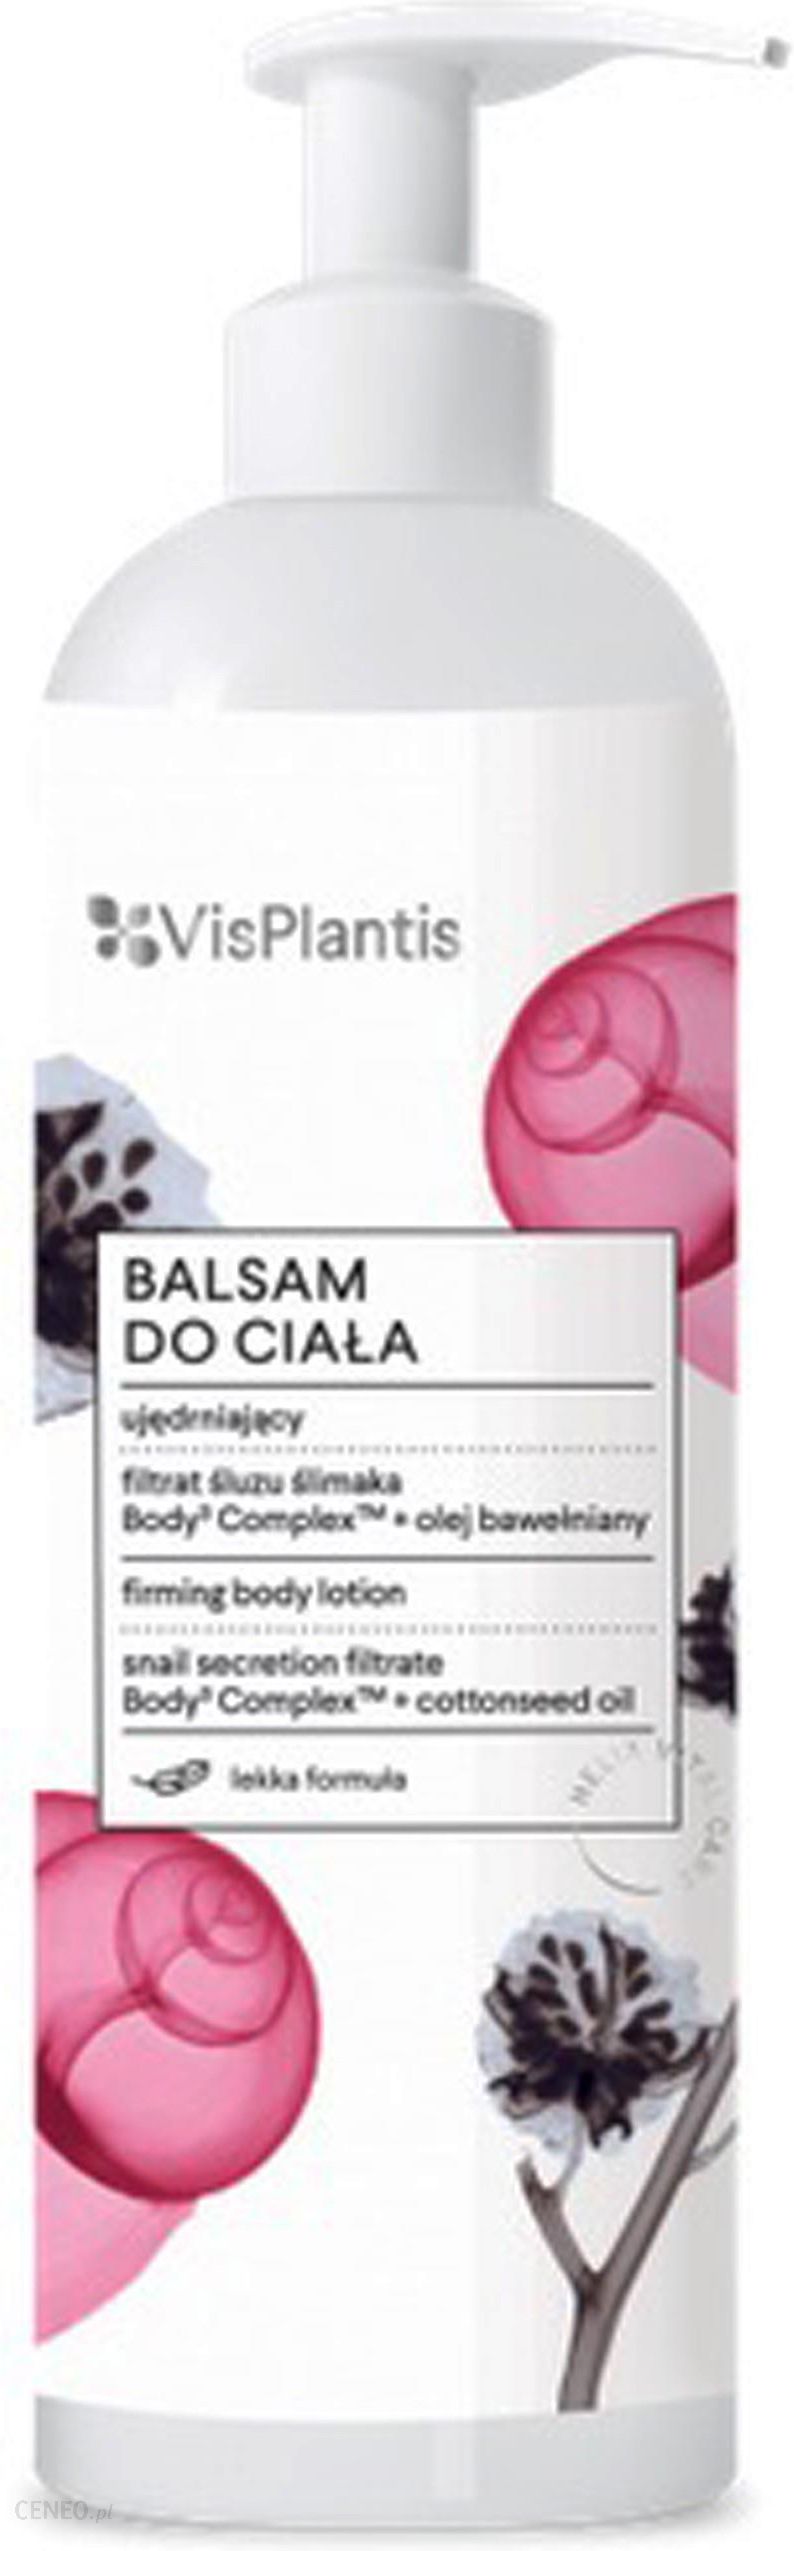 VIS PLANTIS Helix Vital Care balsam antycellulitowy 400ml